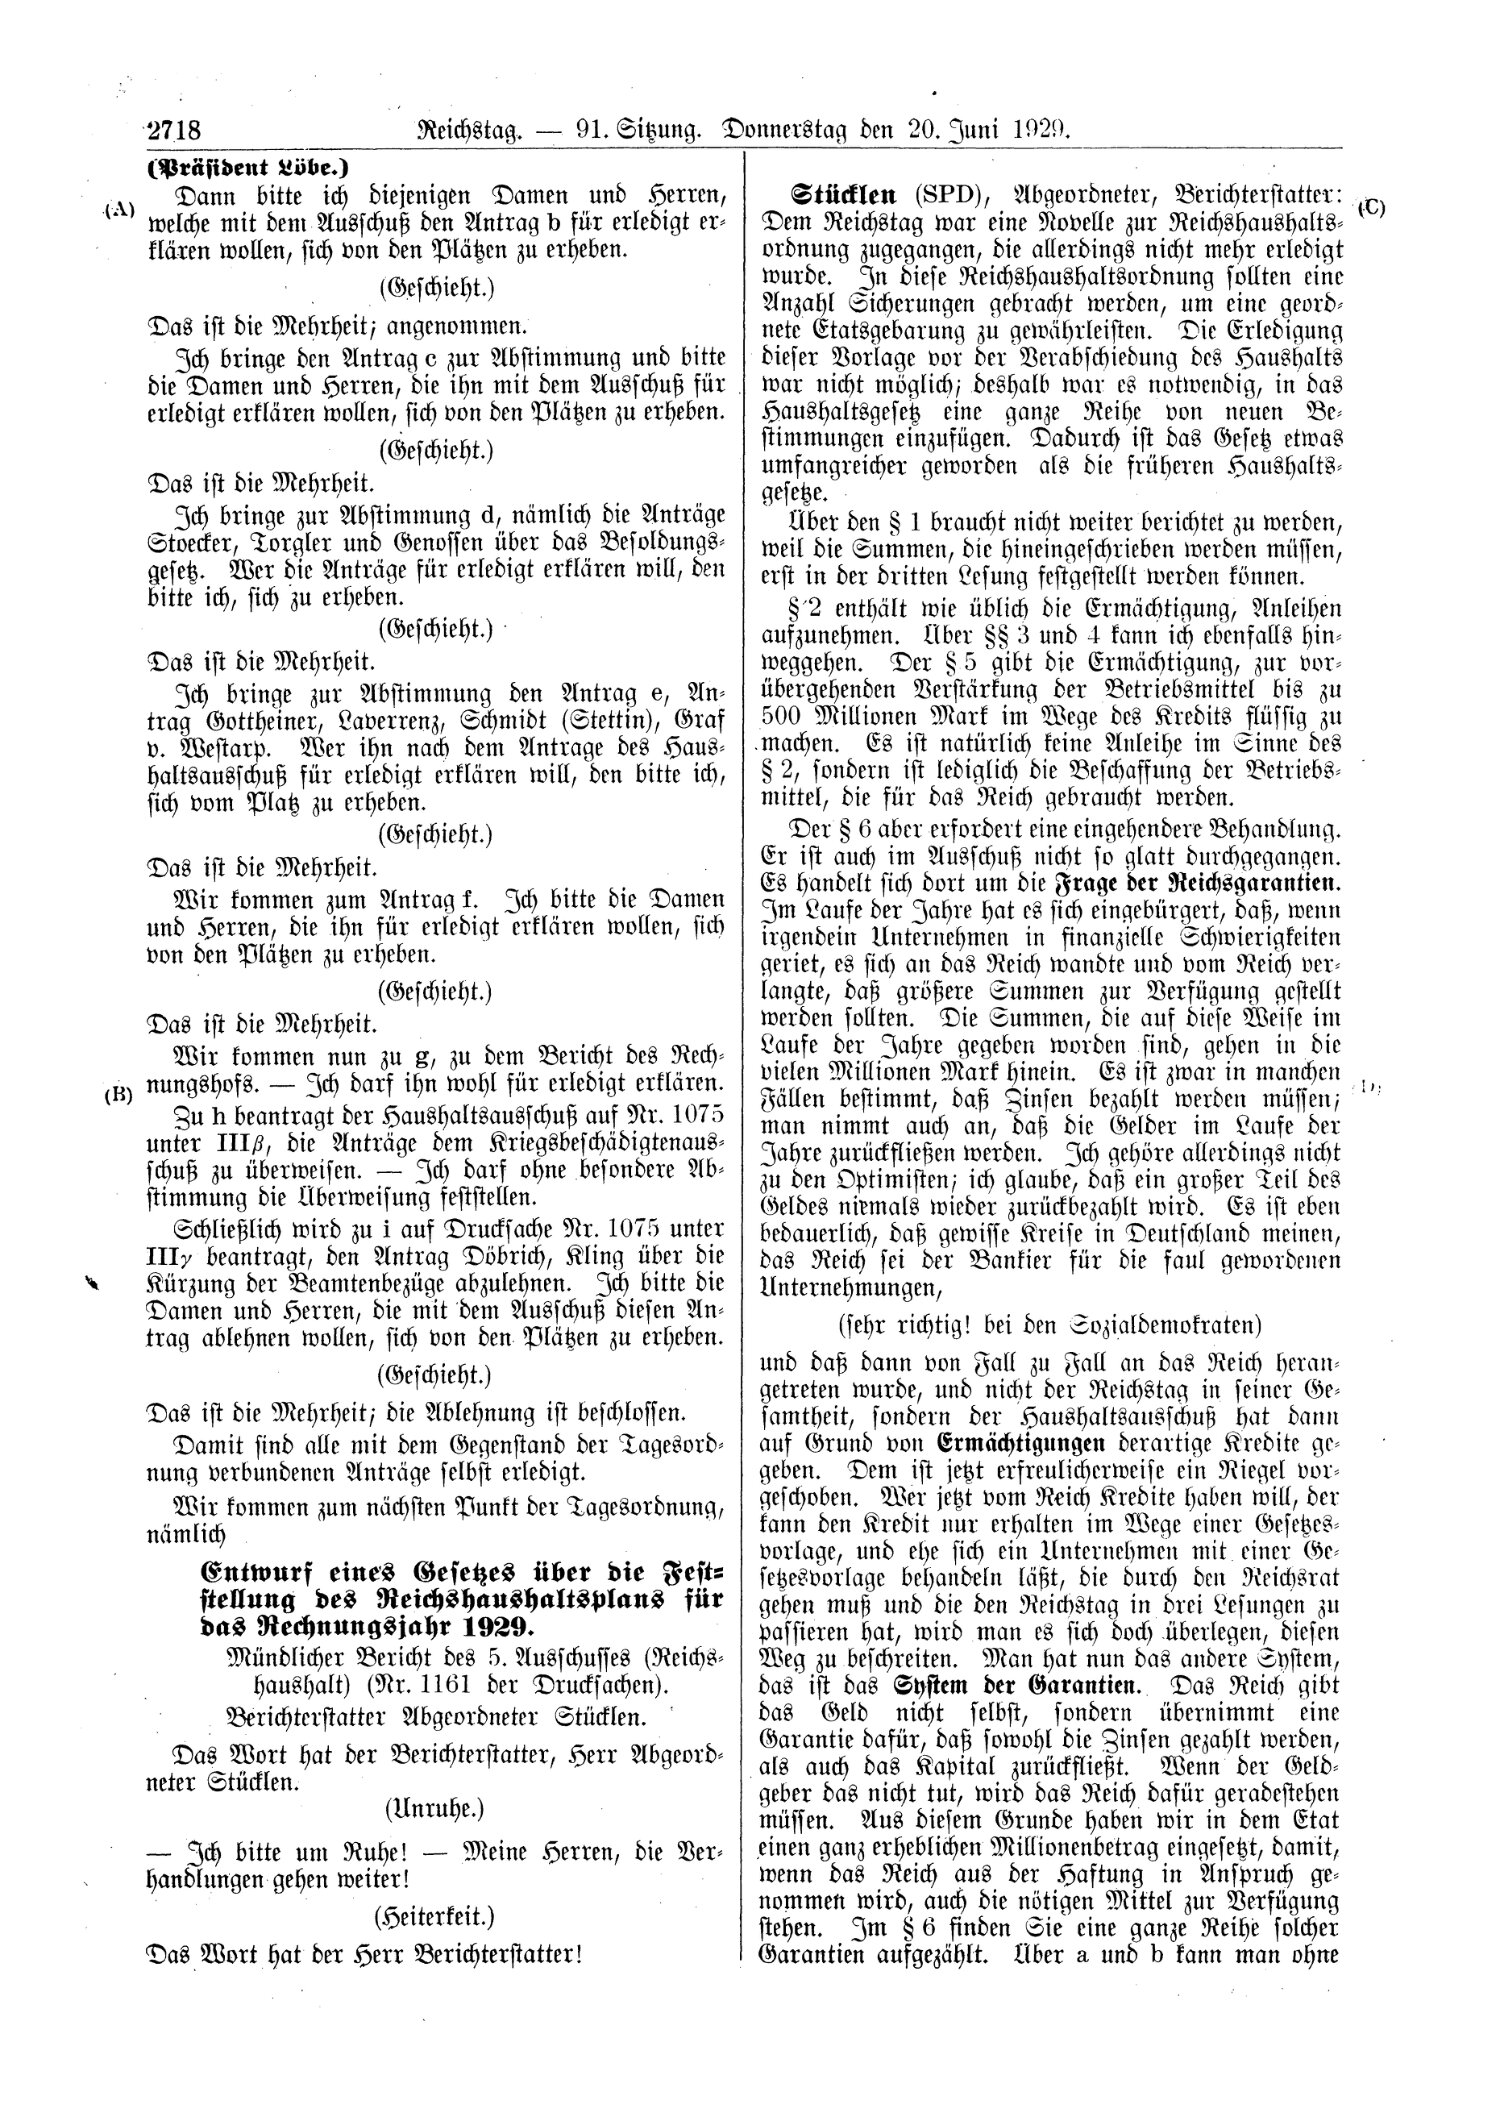 Scan of page 2718